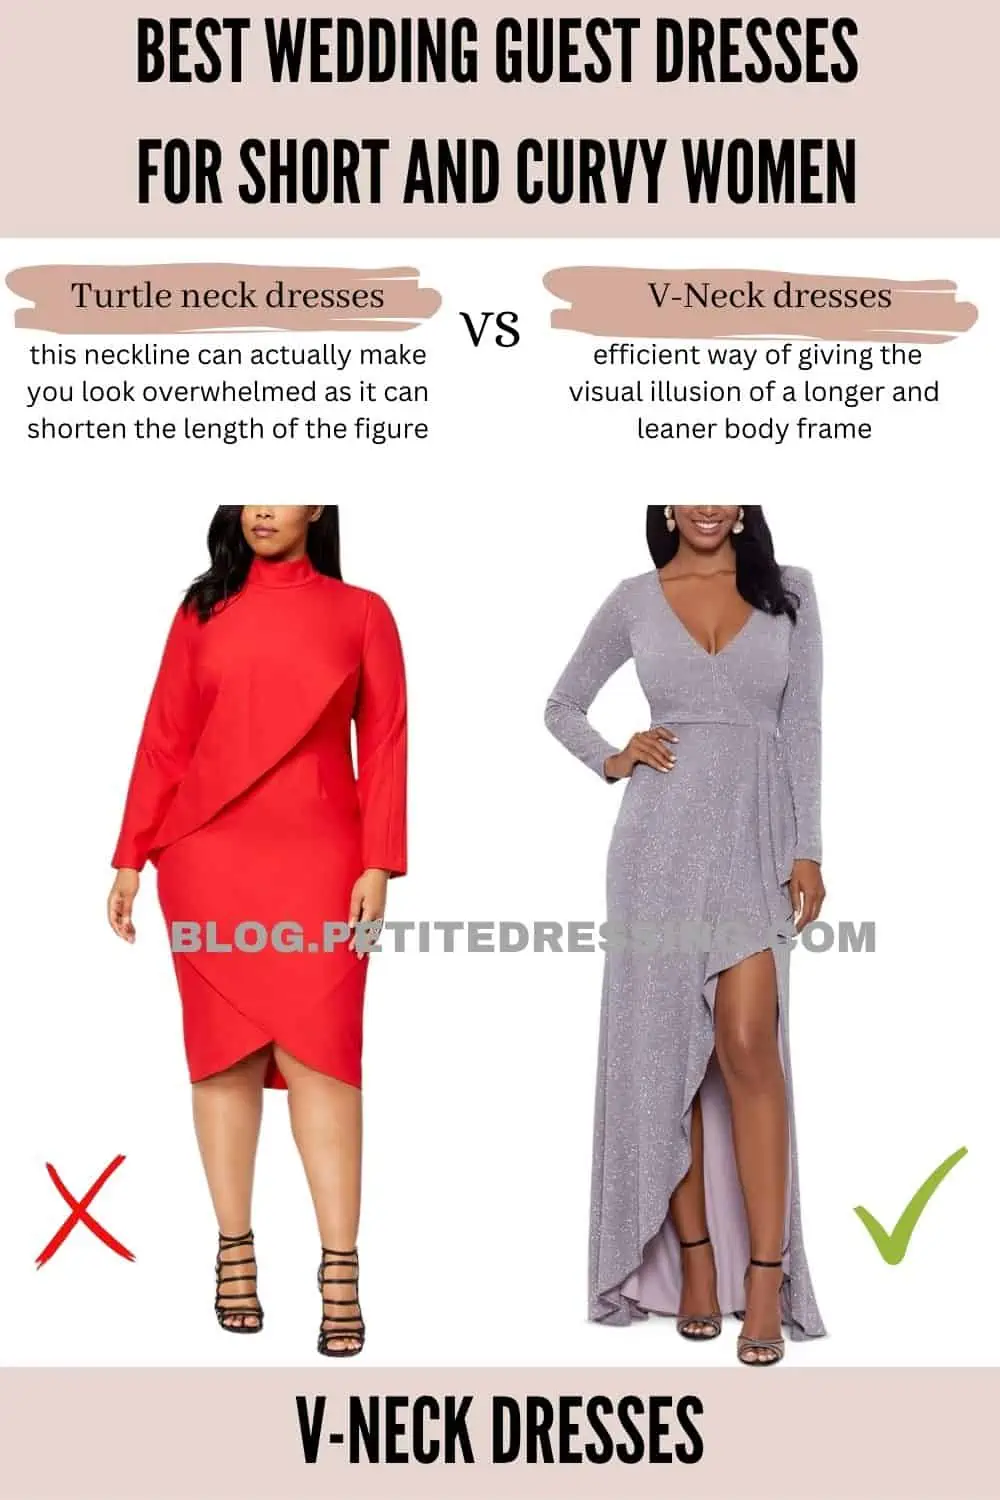 Large Bust, Wedding Guest Dresses That Fit and Flatter Your Body Type